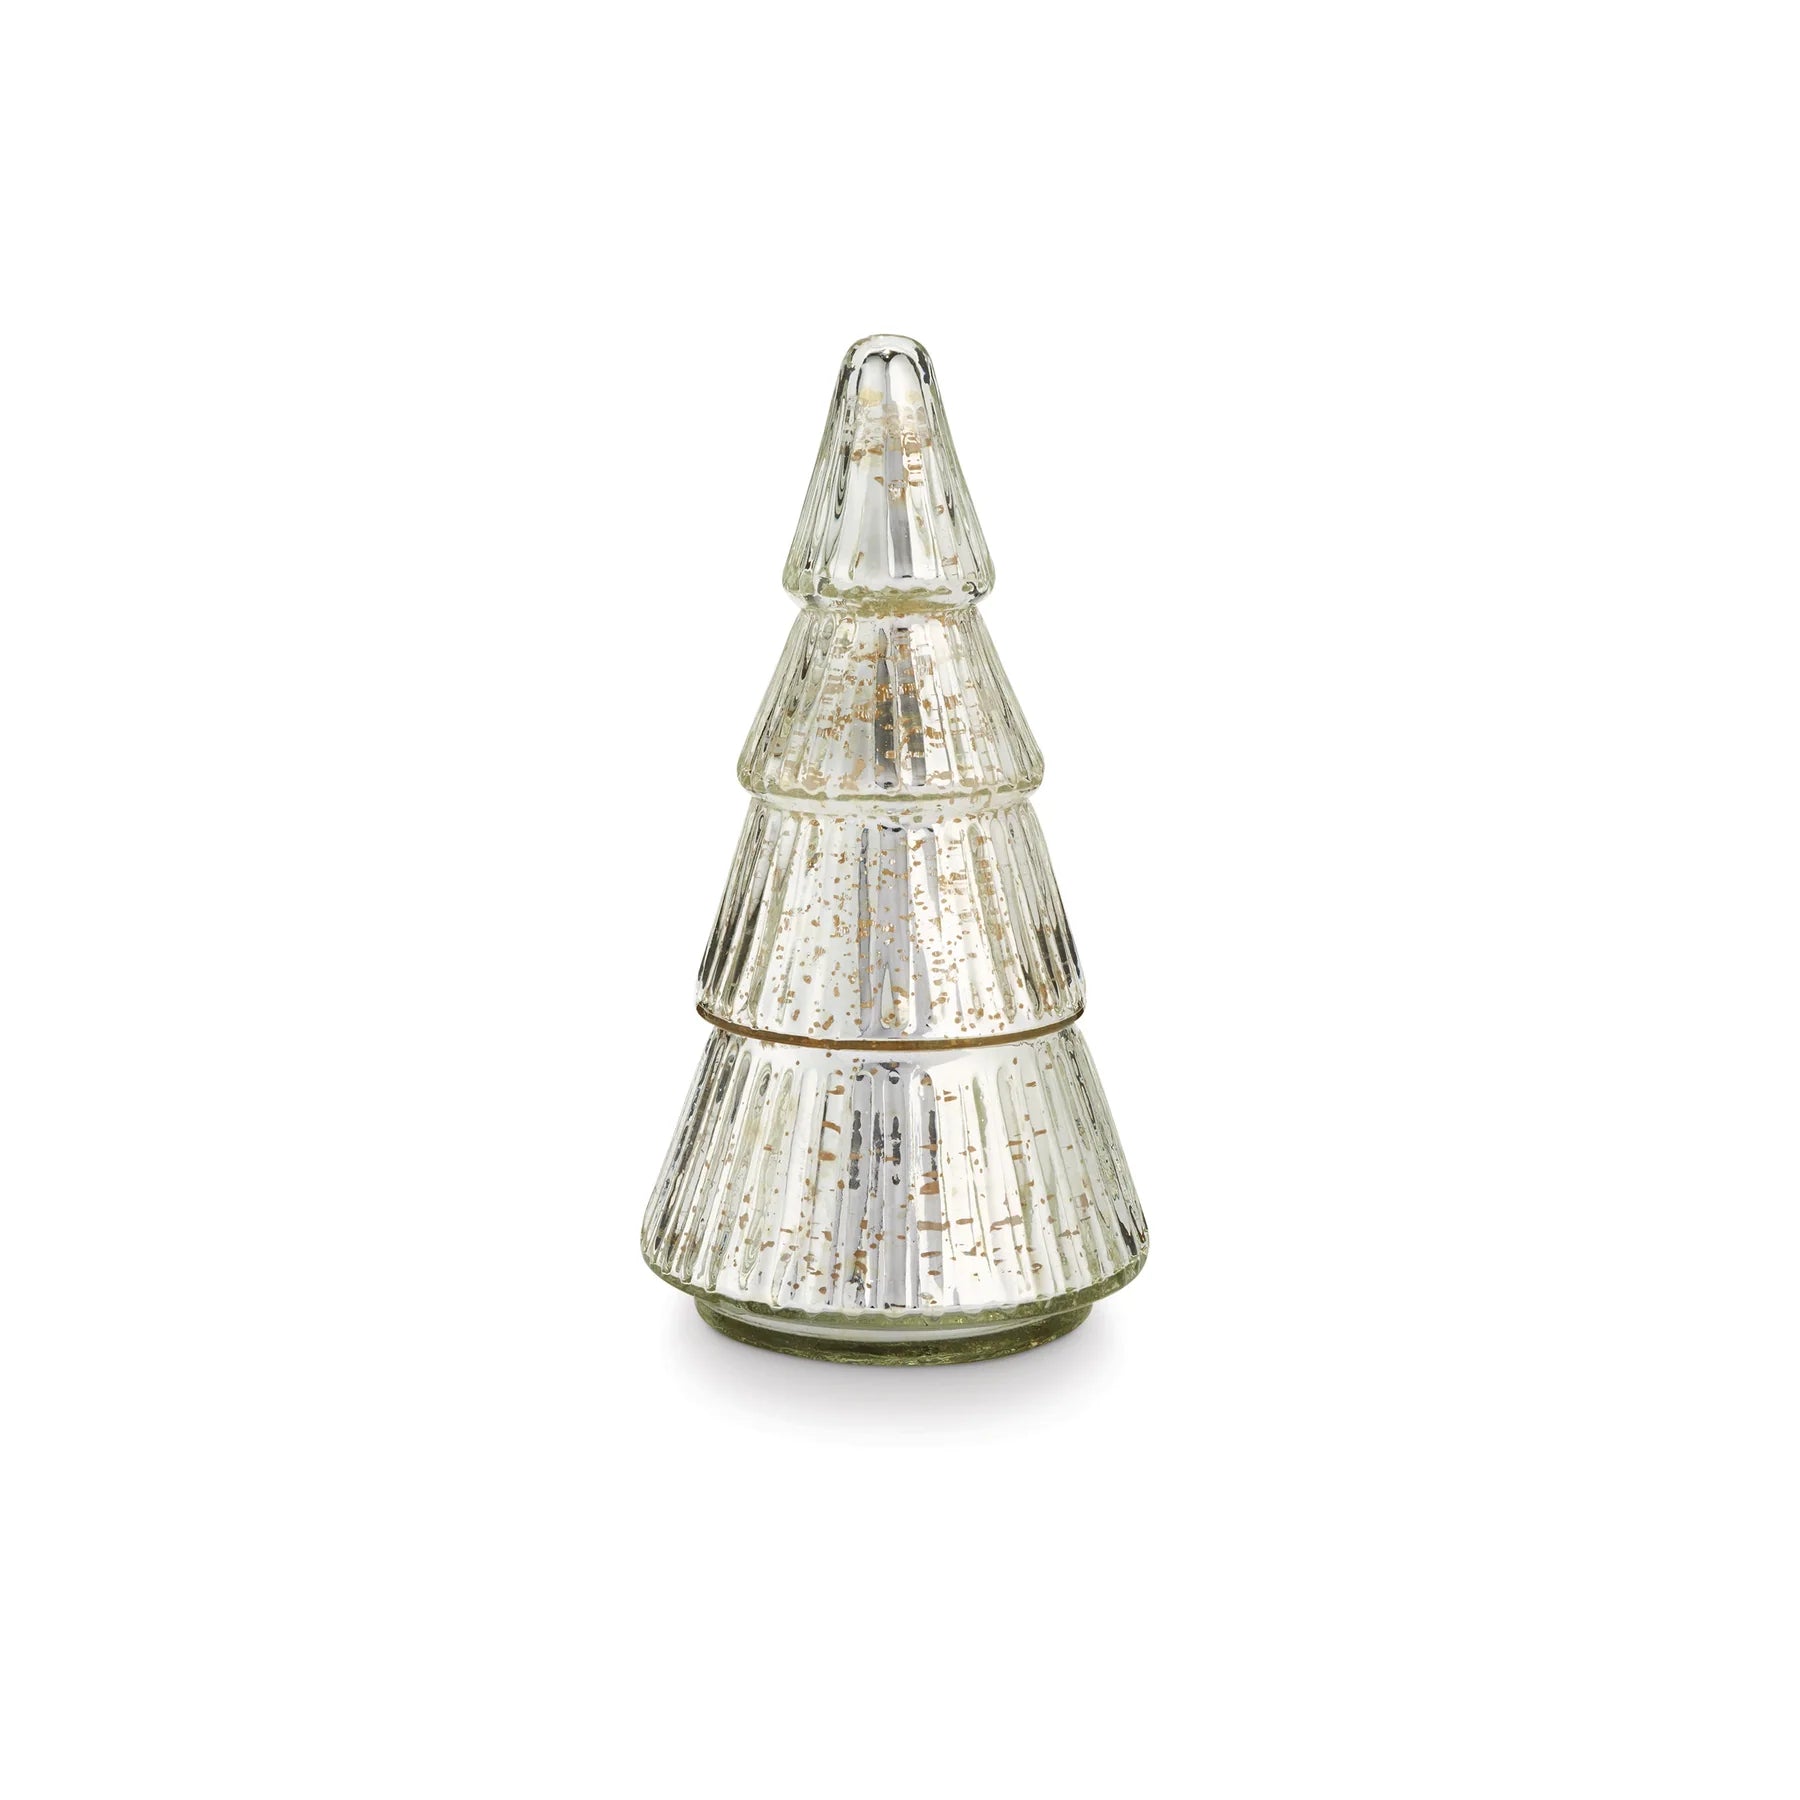 Balsam and Cedar Etched Mercury Glass Tree Candle